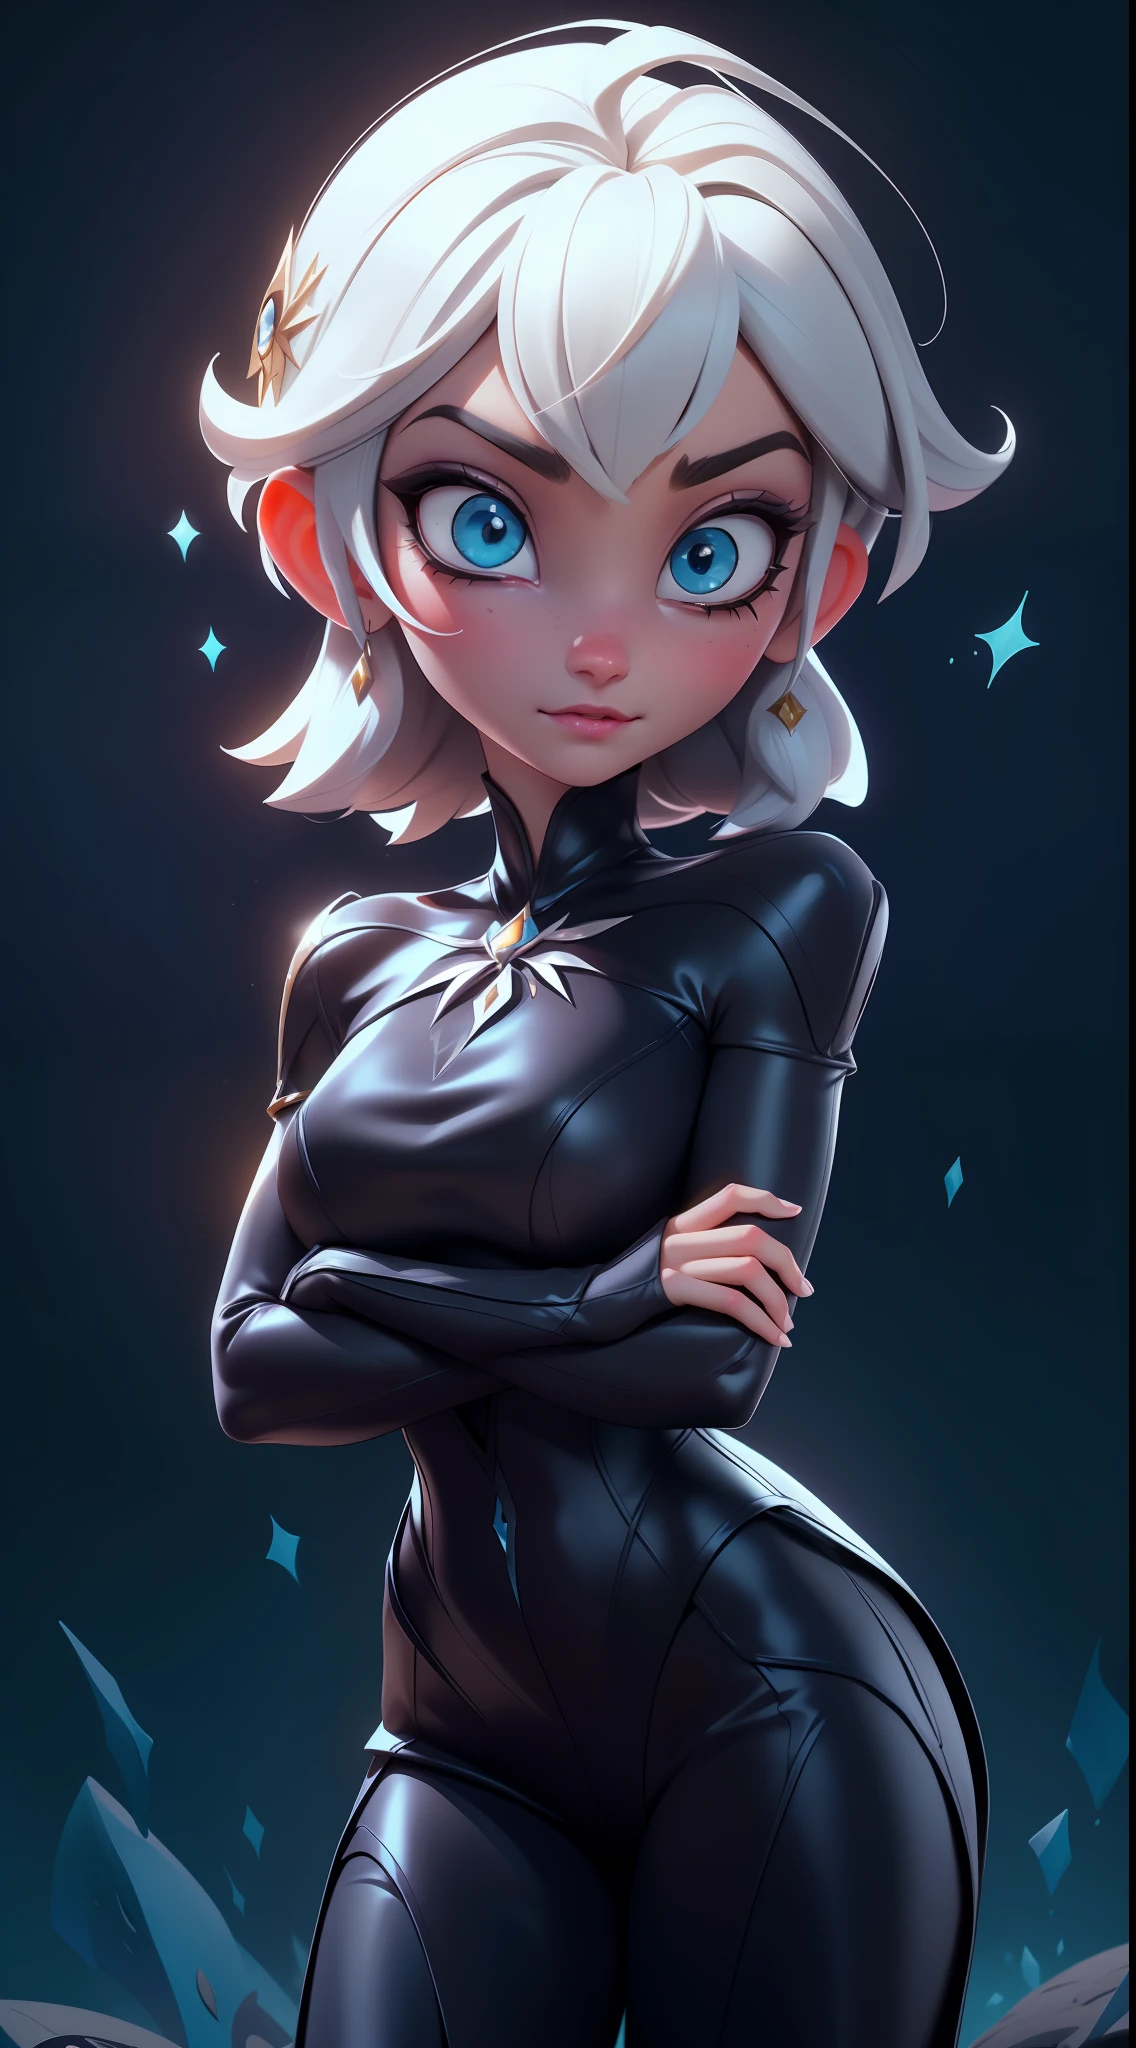 Elsa-Mavis Fusion, melting, Merging models, Mavis clothes, white  hair, particuls, Hotel Transylvania, 1girl, Beautiful, (master part:1.2), (best qualityer:1.2), ((struggling pose)), ((field of battle)), cinemactic, perfects eyes, perfect  skin, perfect lighting, sorrido, Lumiere, Farbe, texturized skin, detail, Beauthfull, wonder wonder wonder wonder wonder wonder wonder wonder wonder wonder wonder wonder wonder wonder wonder wonder wonder wonder wonder wonder wonder wonder wonder wonder wonder wonder wonder wonder wonder wonder wonder wonder, ultra detali, face perfect